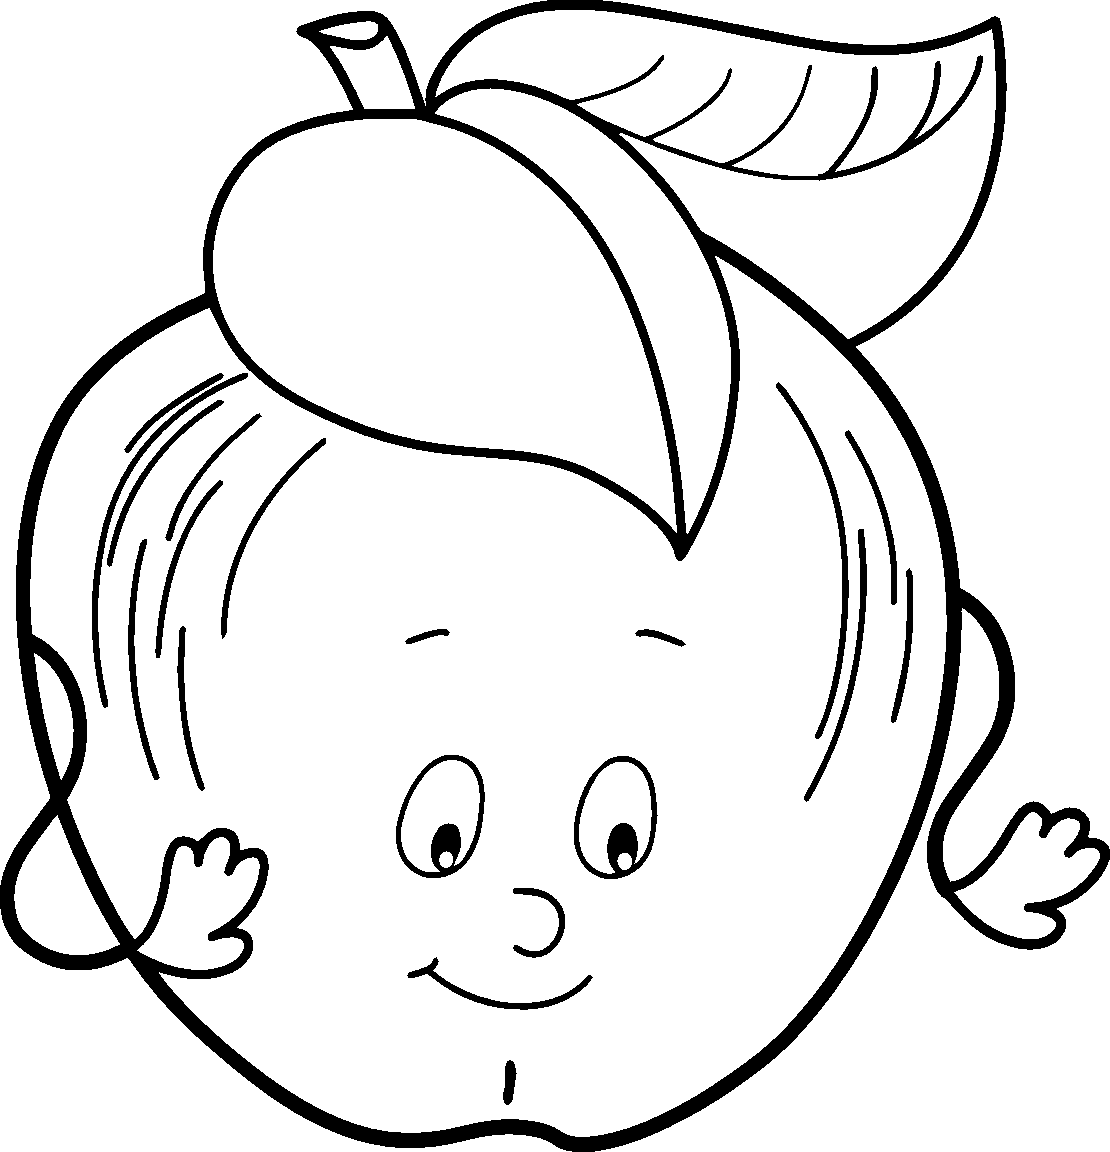 Misc | Coloring pages wallpaper - Part 2